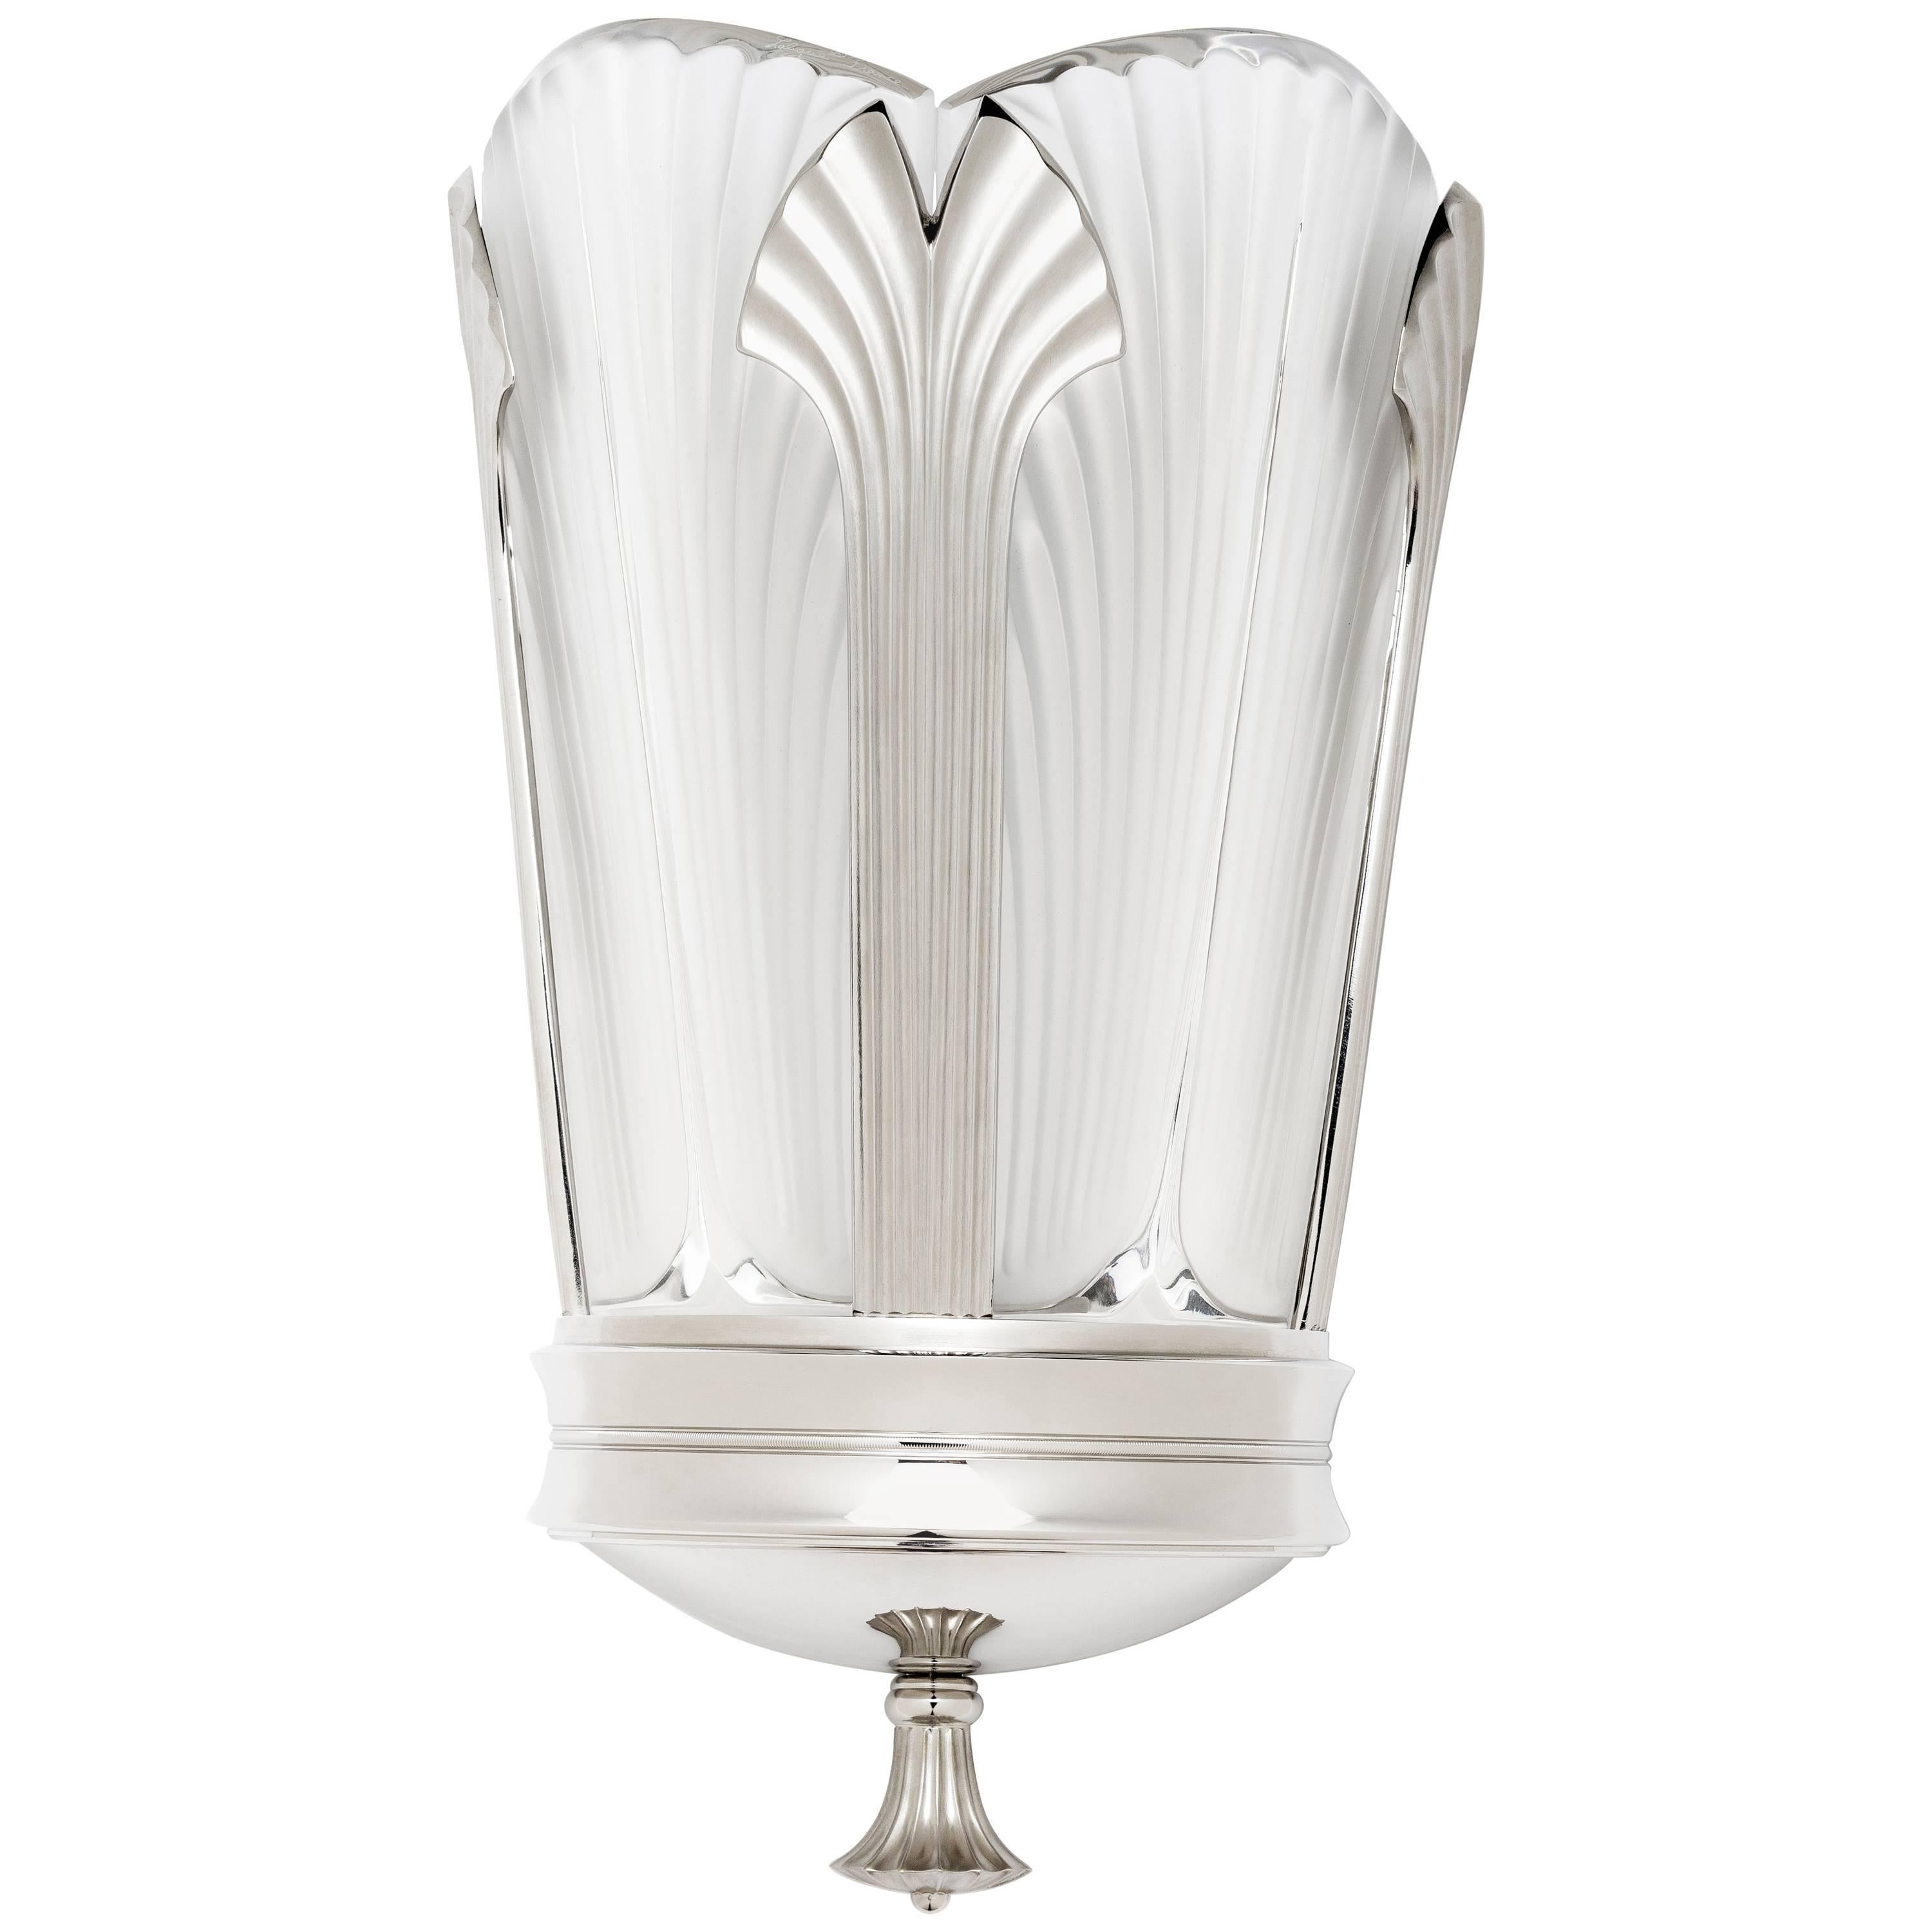 Ginkgo-Inspired Crystal and Brushed Nickel Wall Sconce by Lalique & Delisle